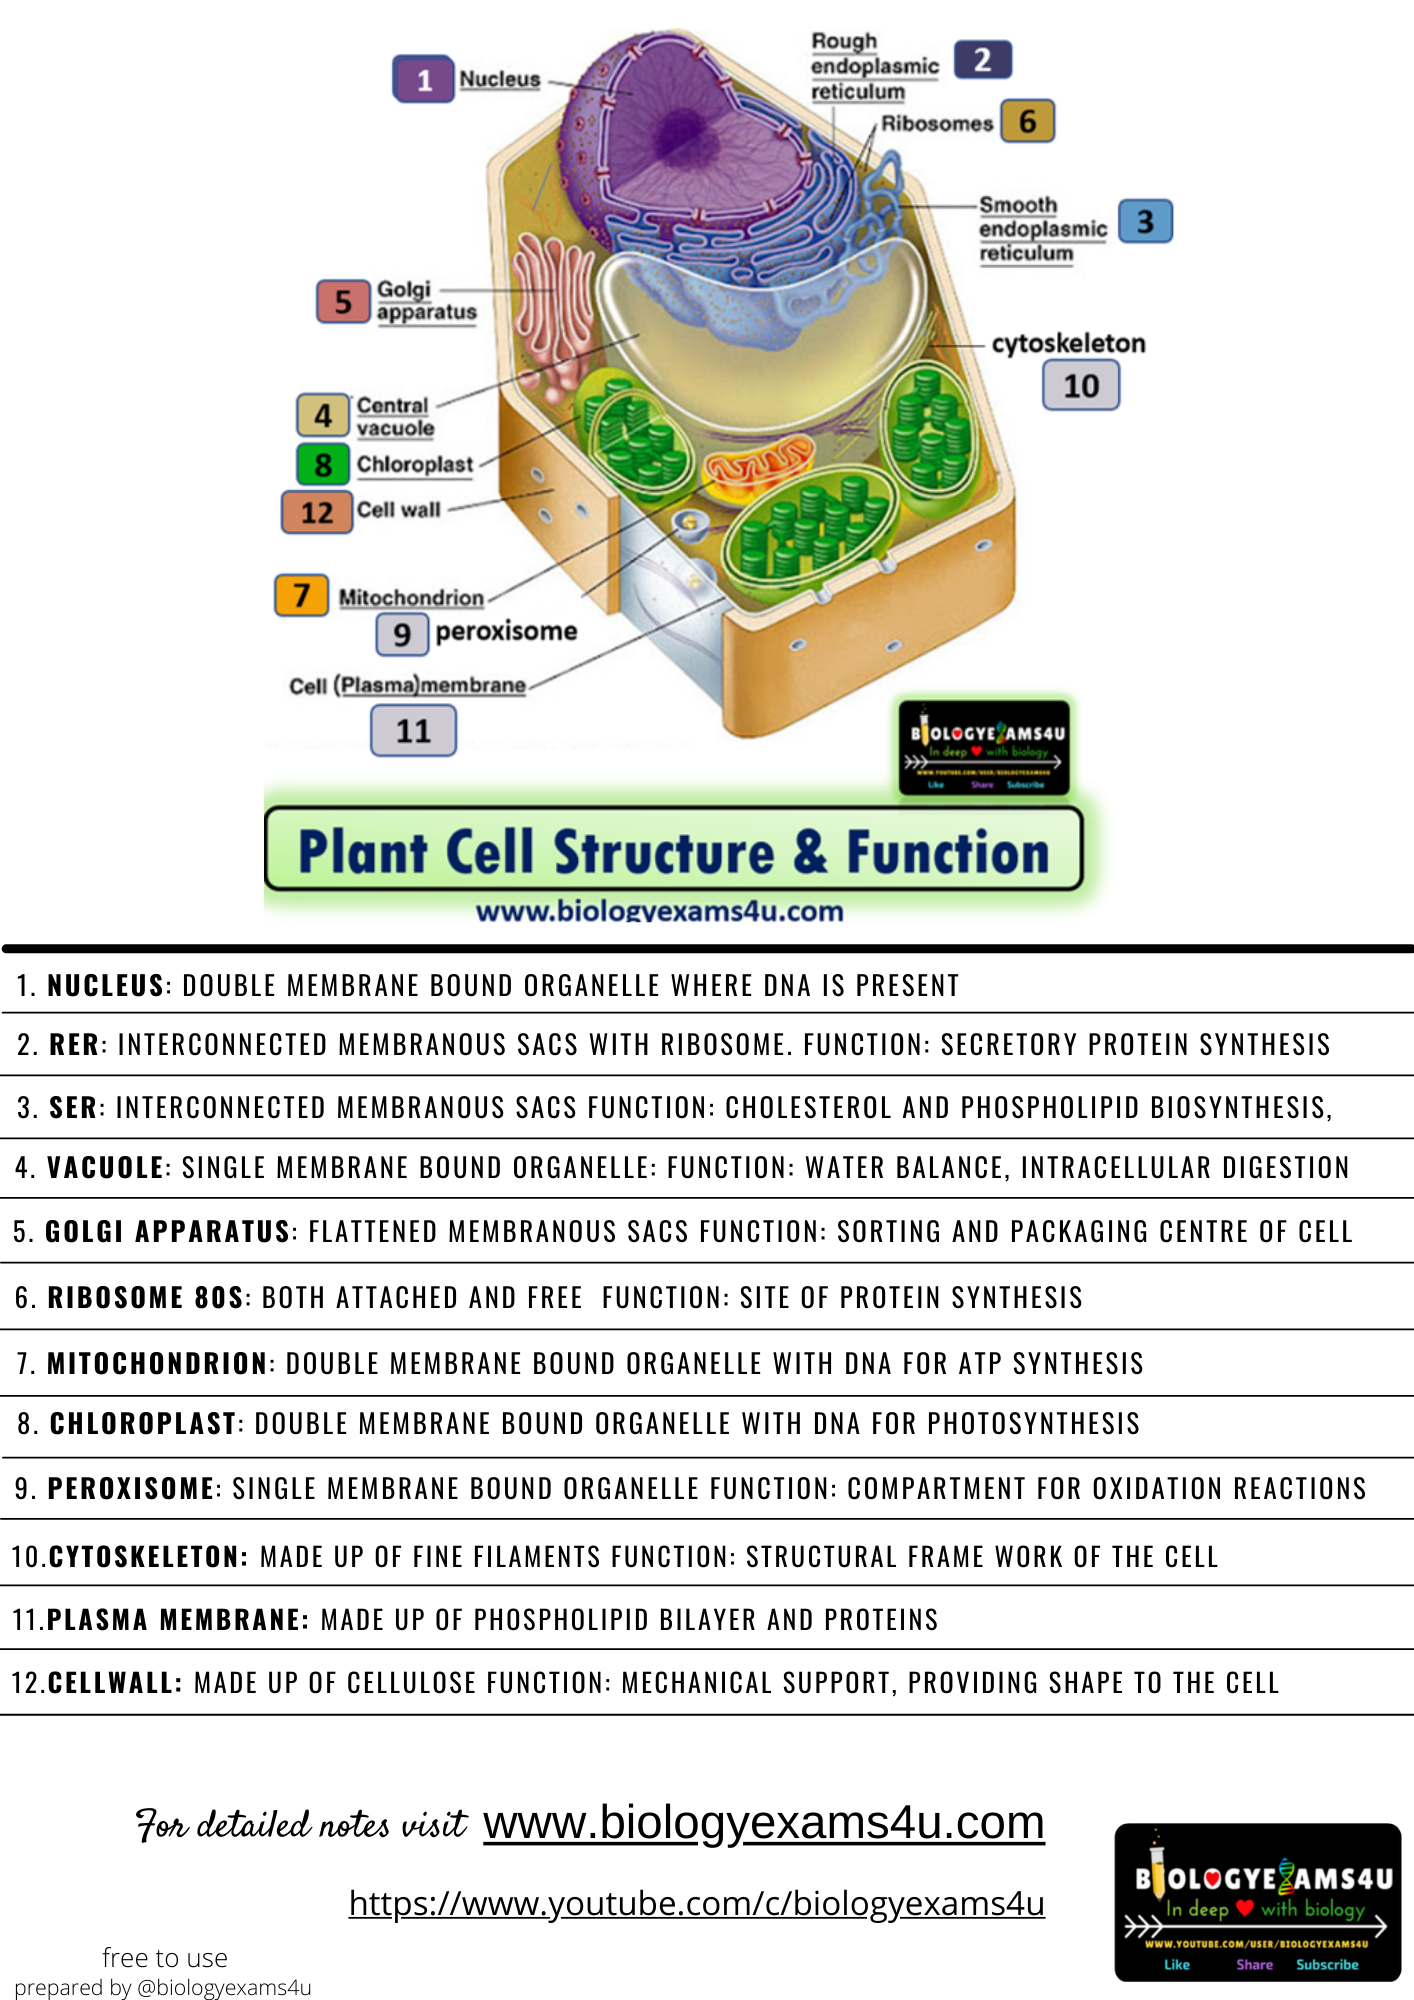 Plant cell structure and Function Poster